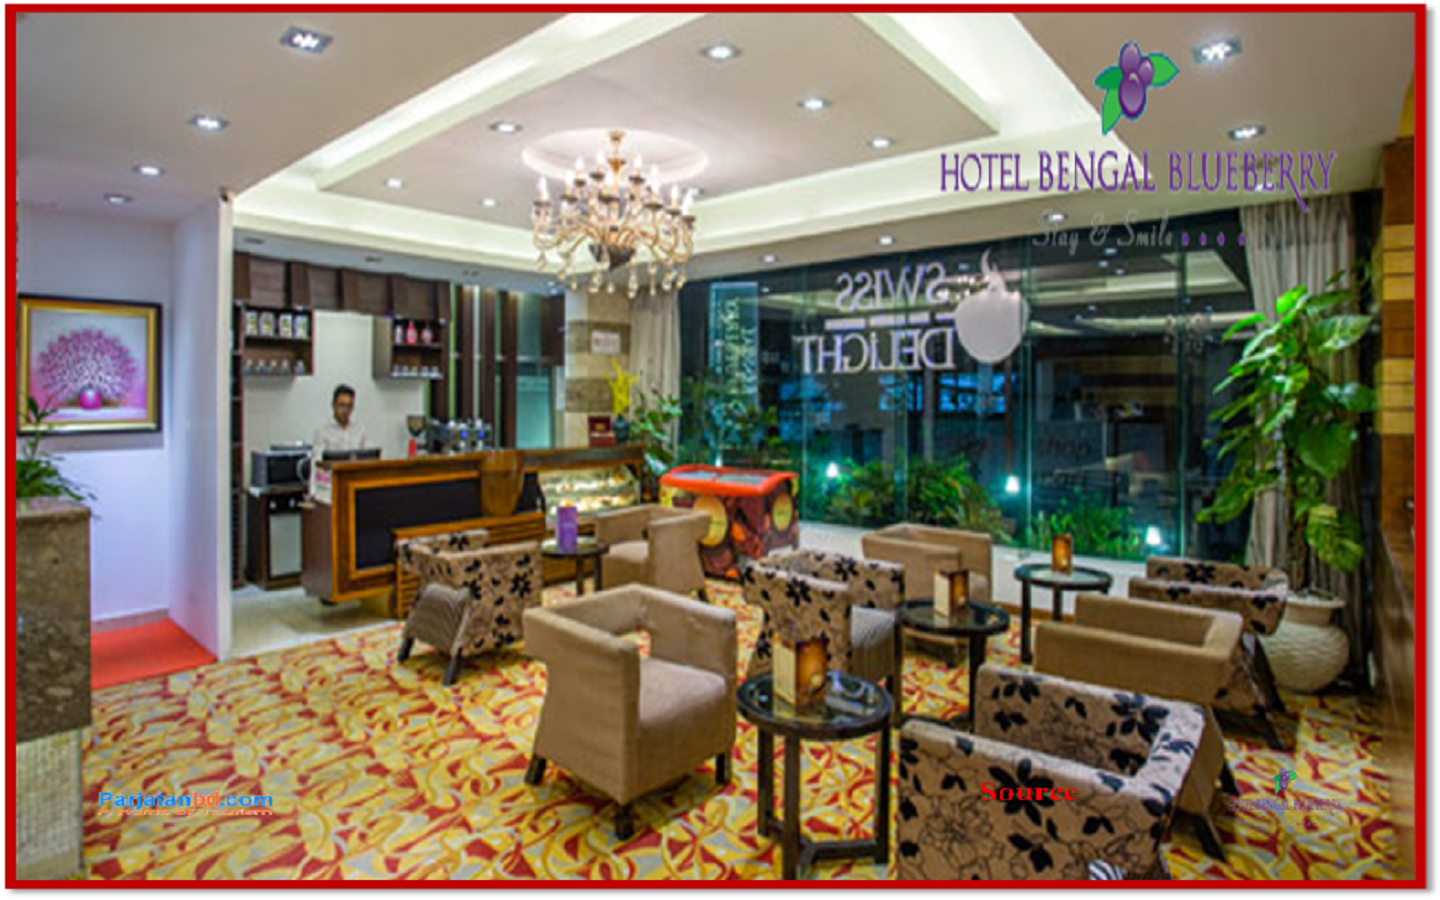 Hotel Bengal Blueberry, Gulshan 2 Picture-2